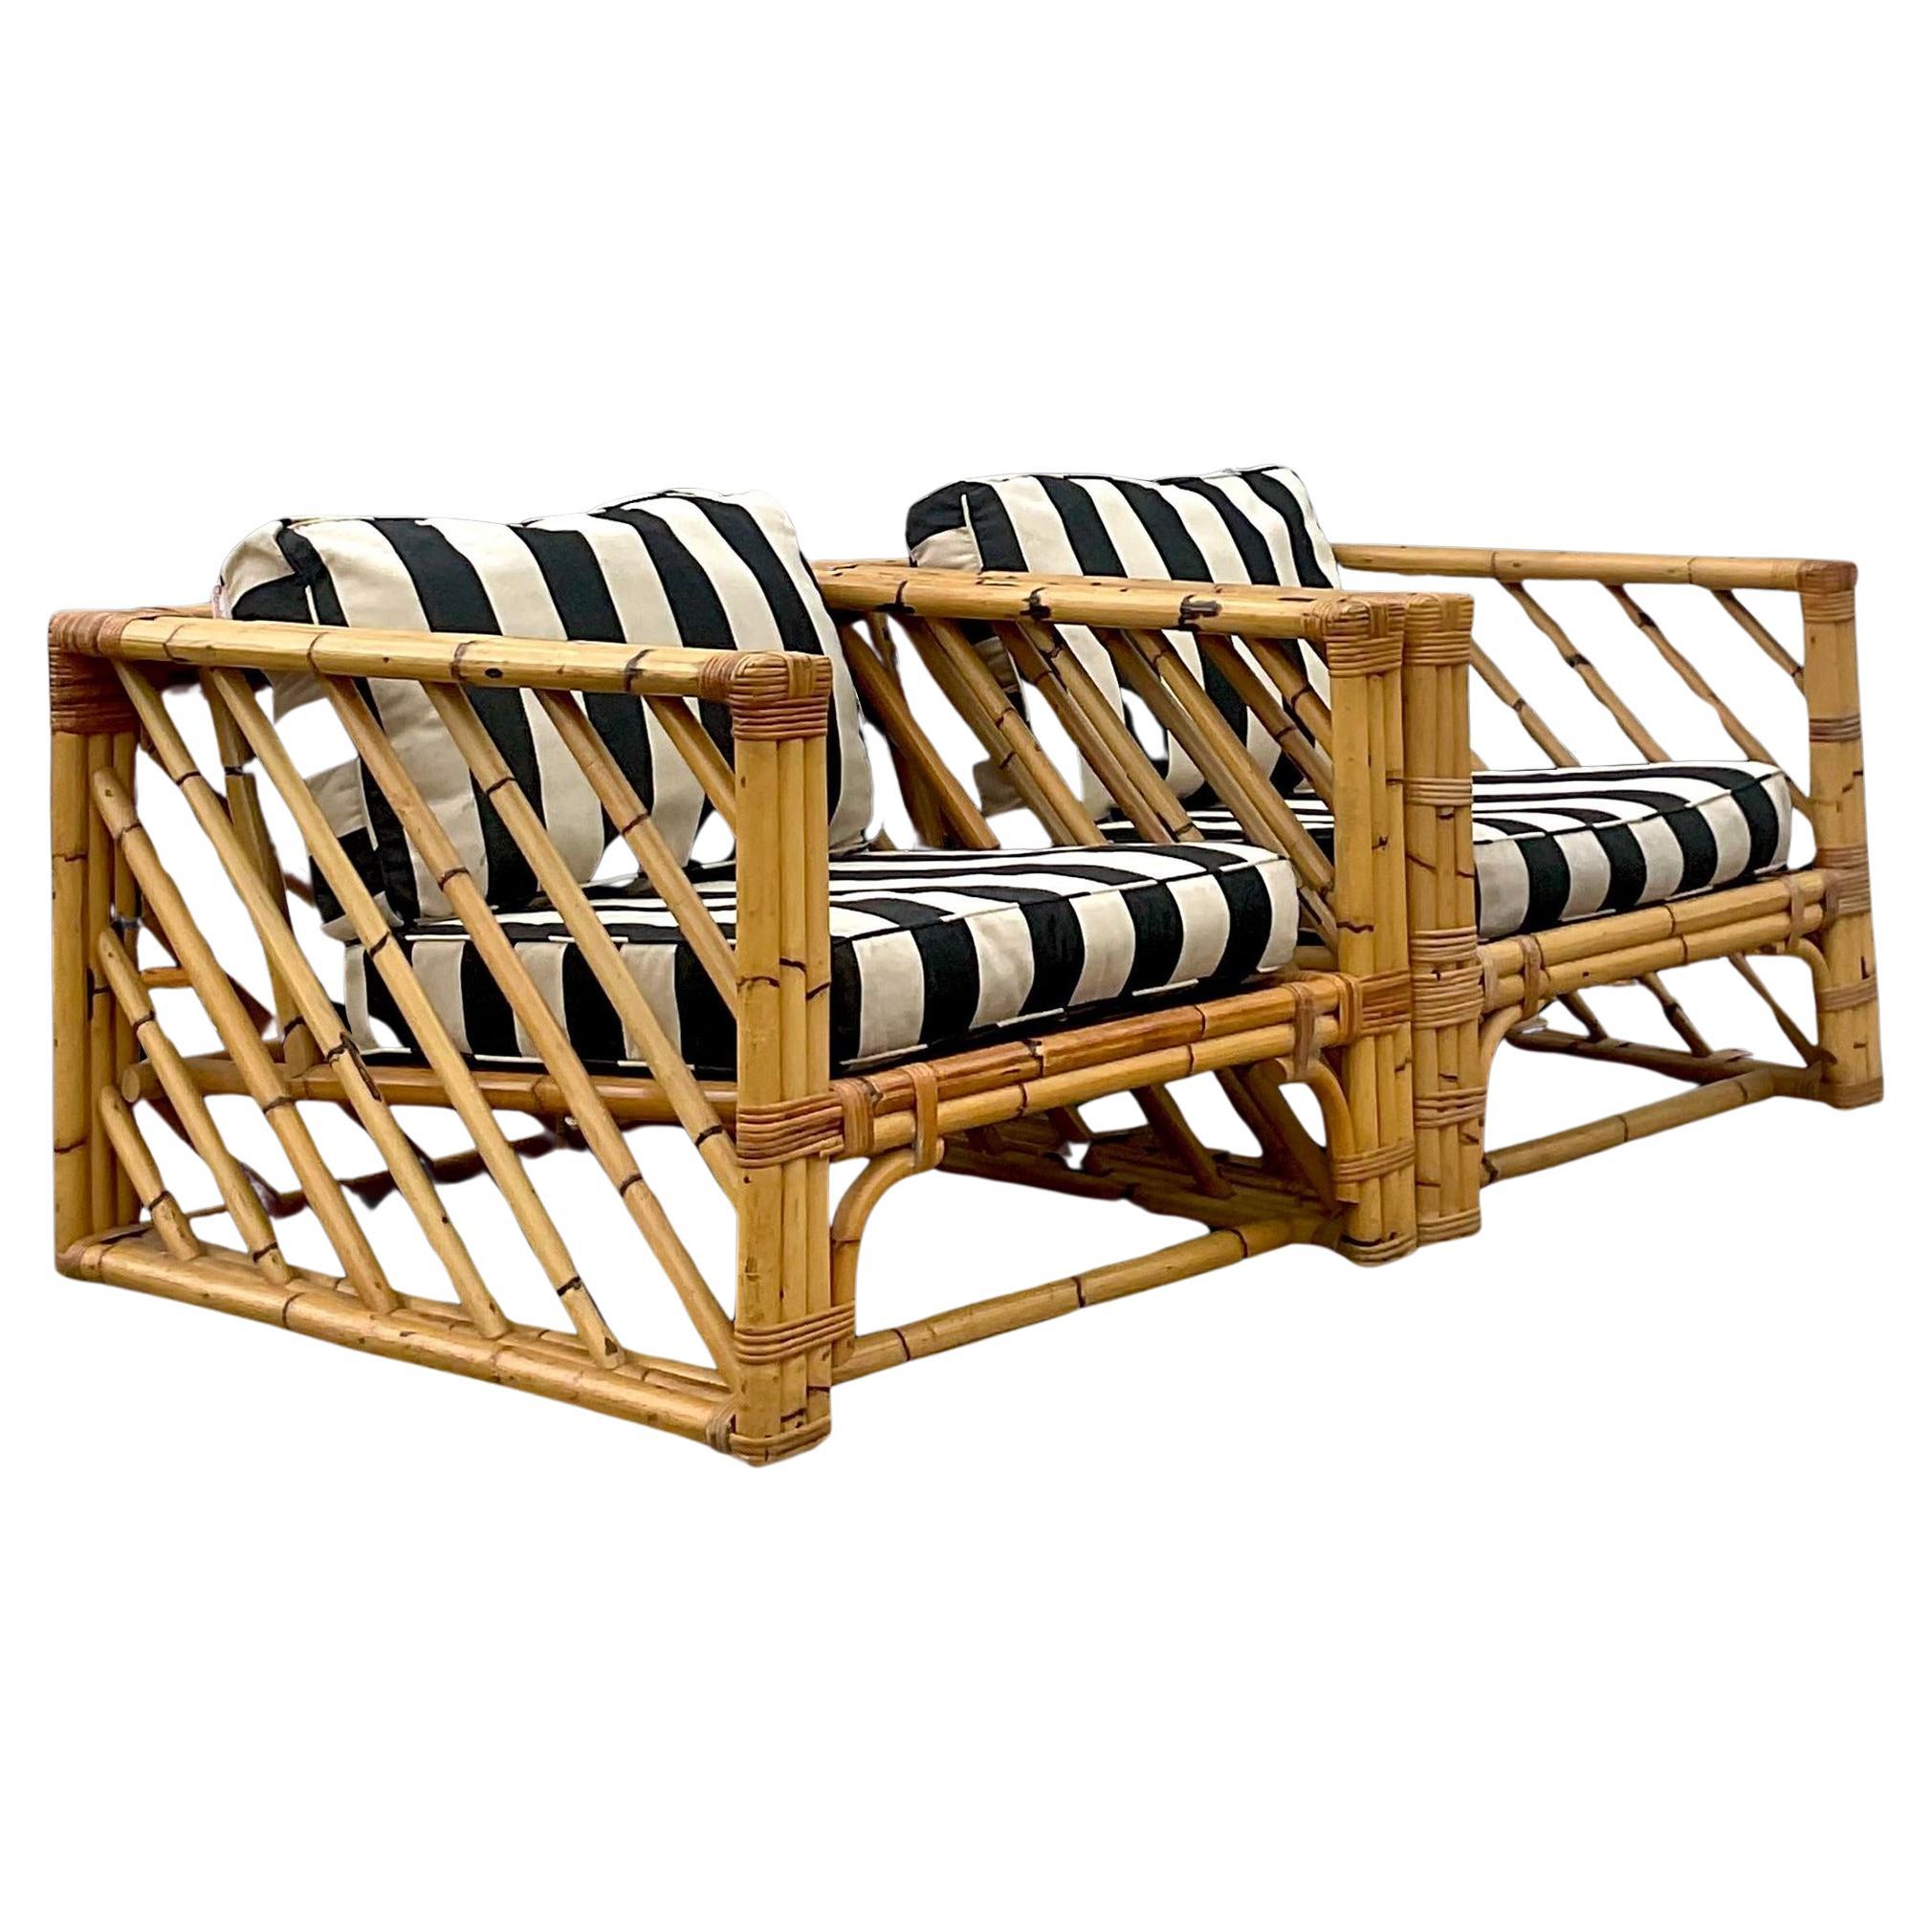 Vintage Coastal Chevron Bamboo Lounge Chairs - a Pair For Sale